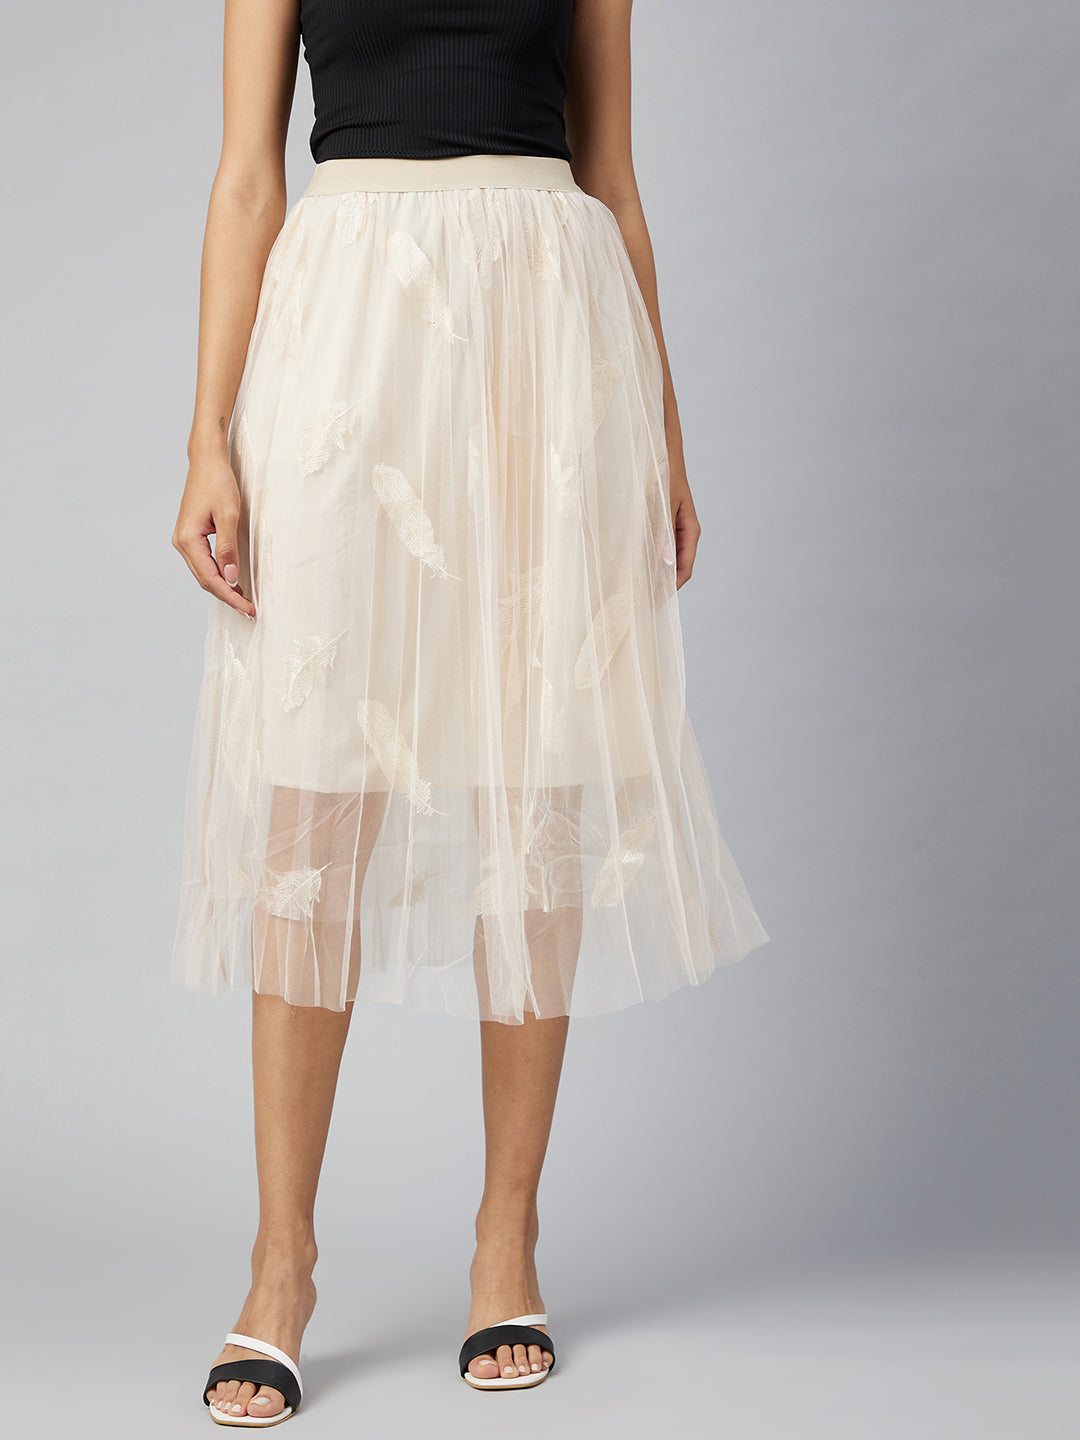 Women's Beige self embroidered Net Skirt with Lining